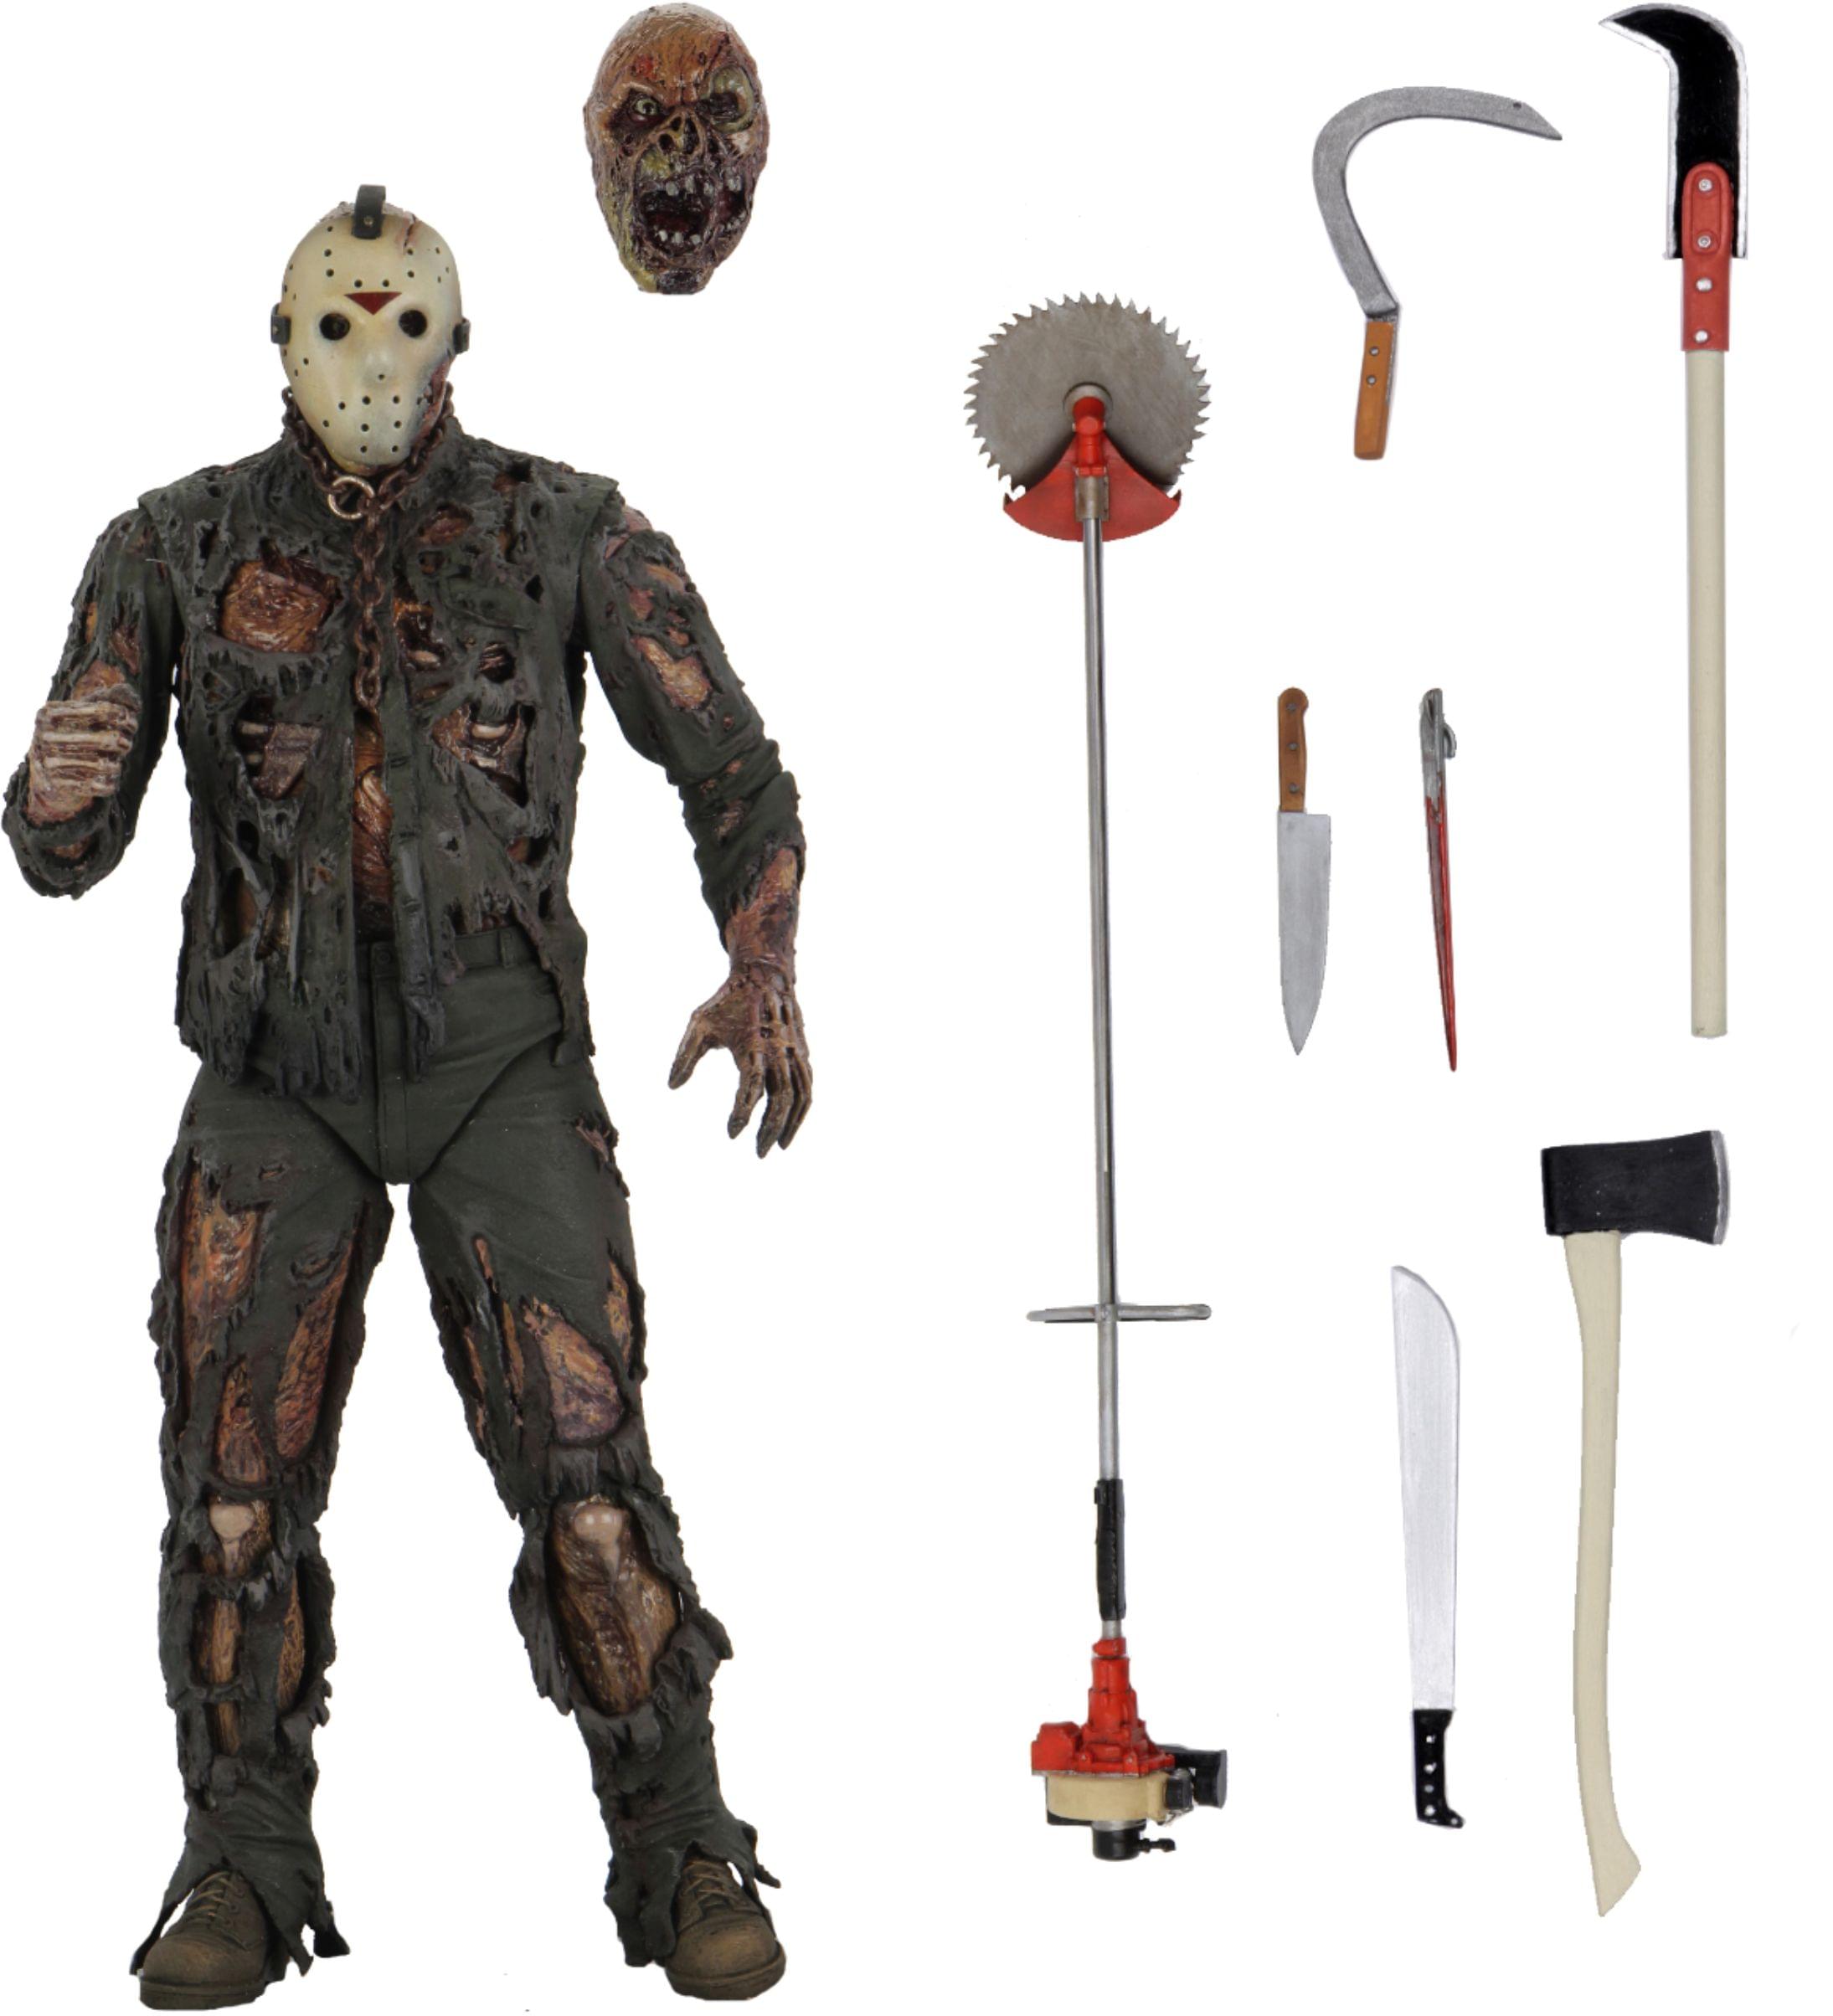 Photos - Action Figures / Transformers NECA Friday the 13th VII 7 Inch Scale Ultimate Jason Voorhees Action Figure NEC 